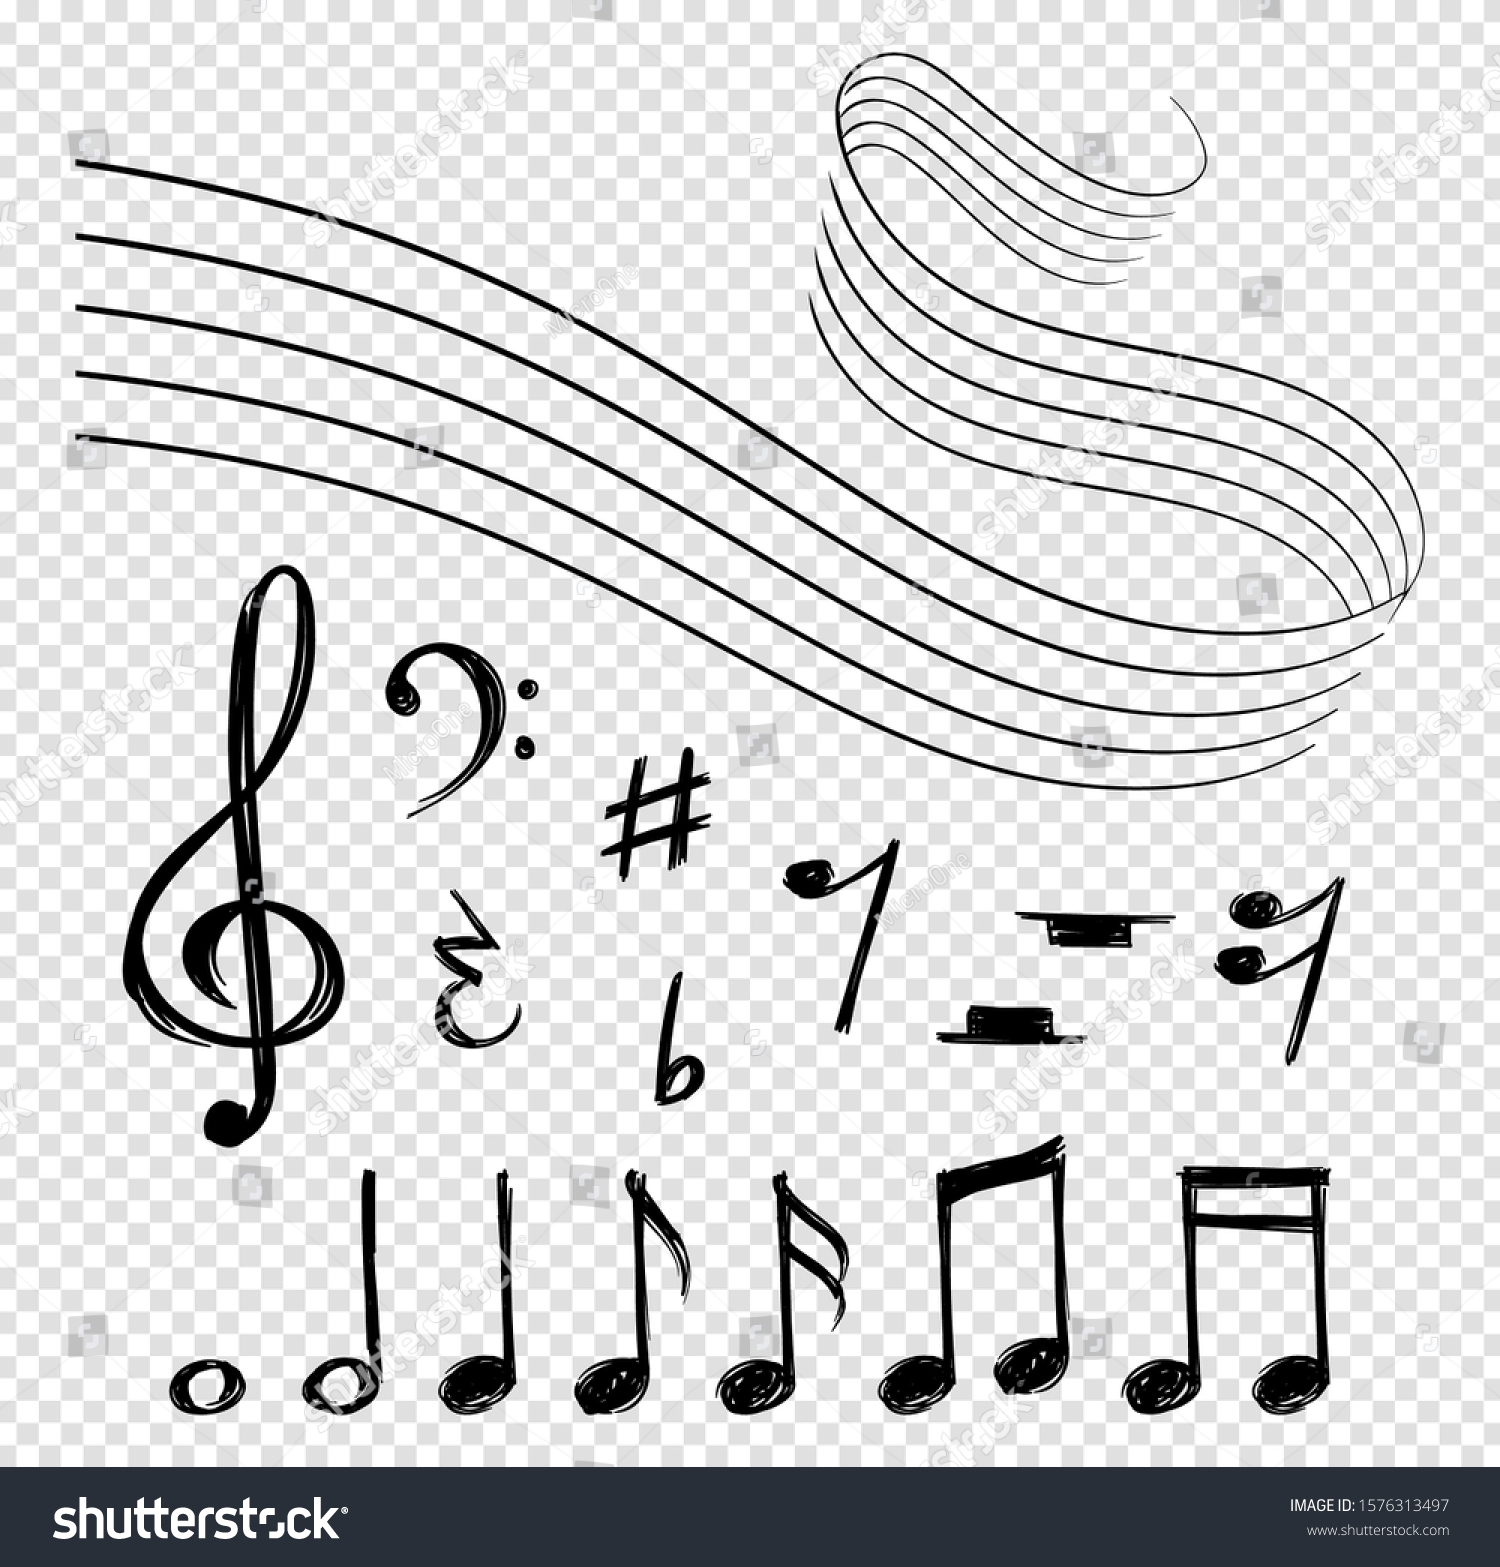 12,596 Music stave Images, Stock Photos & Vectors | Shutterstock